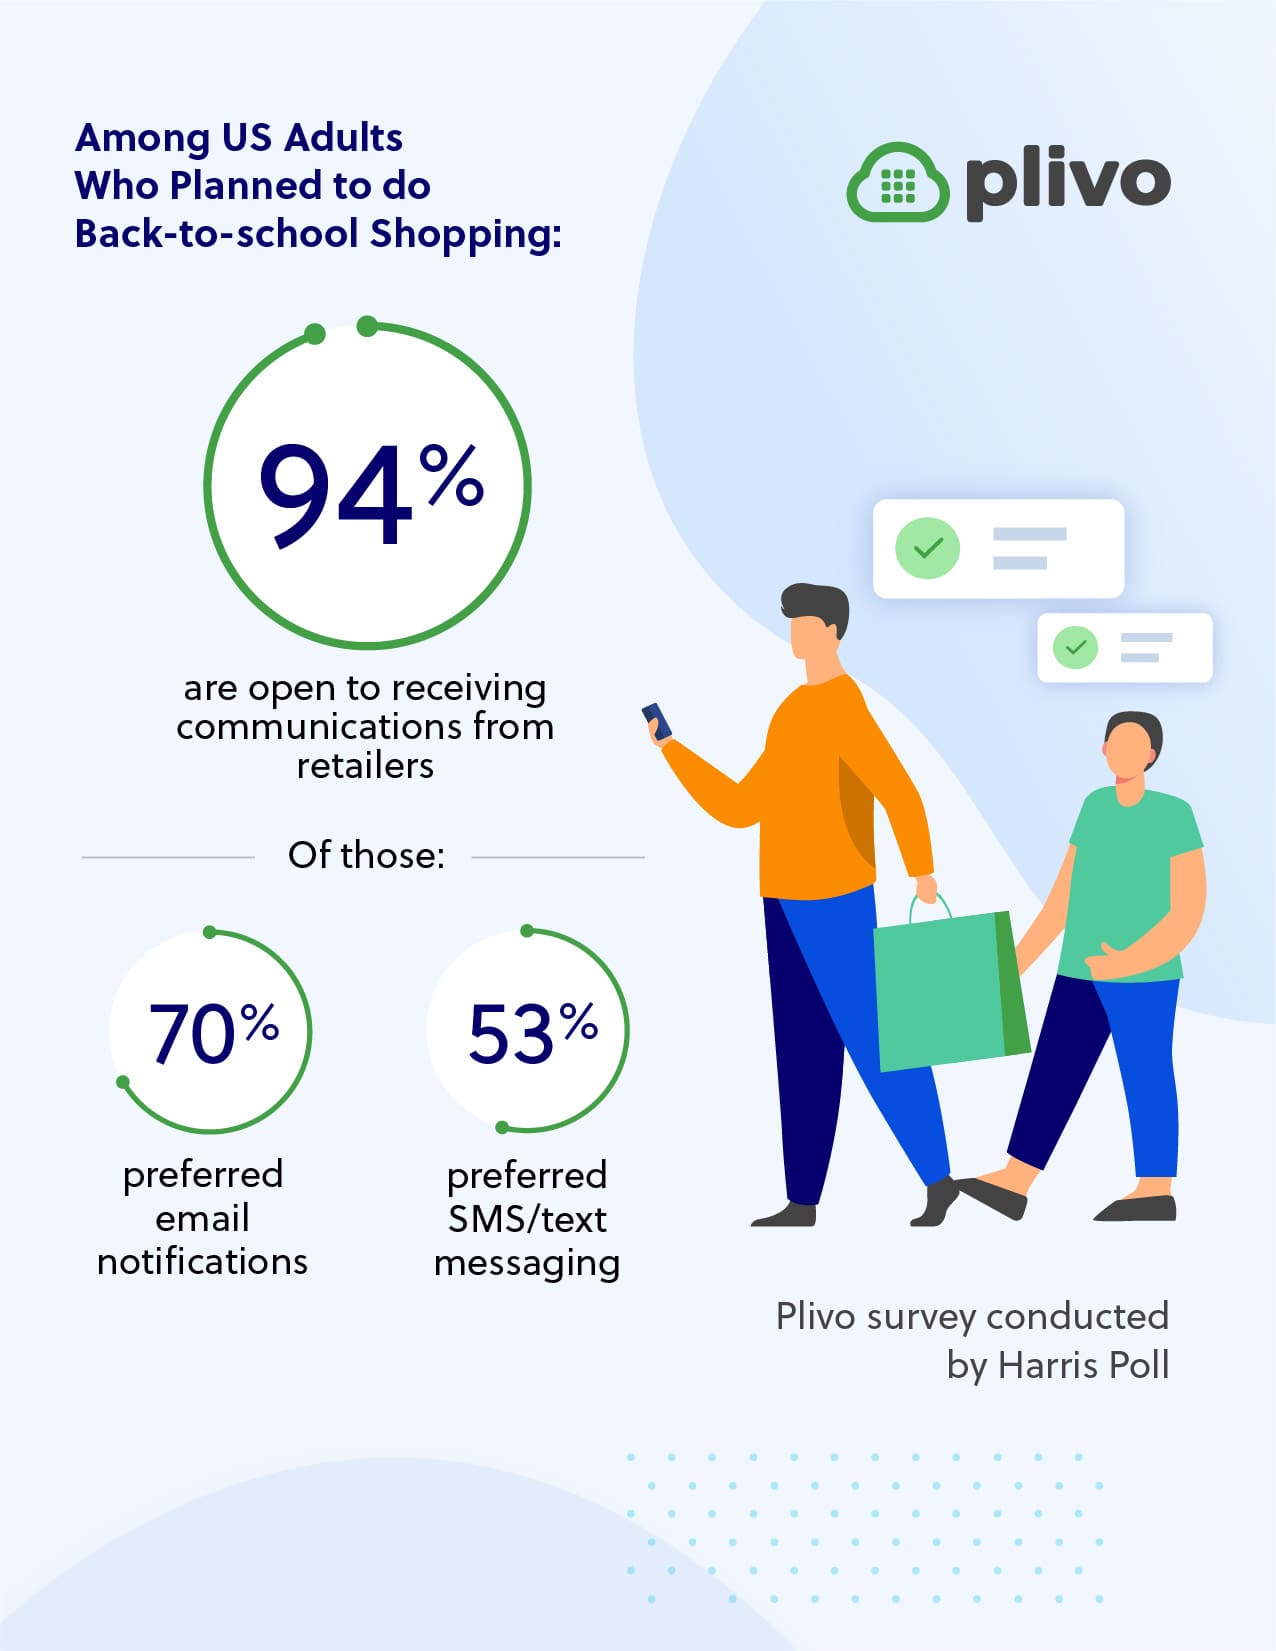 Plivo survey conducted by Harris Poll